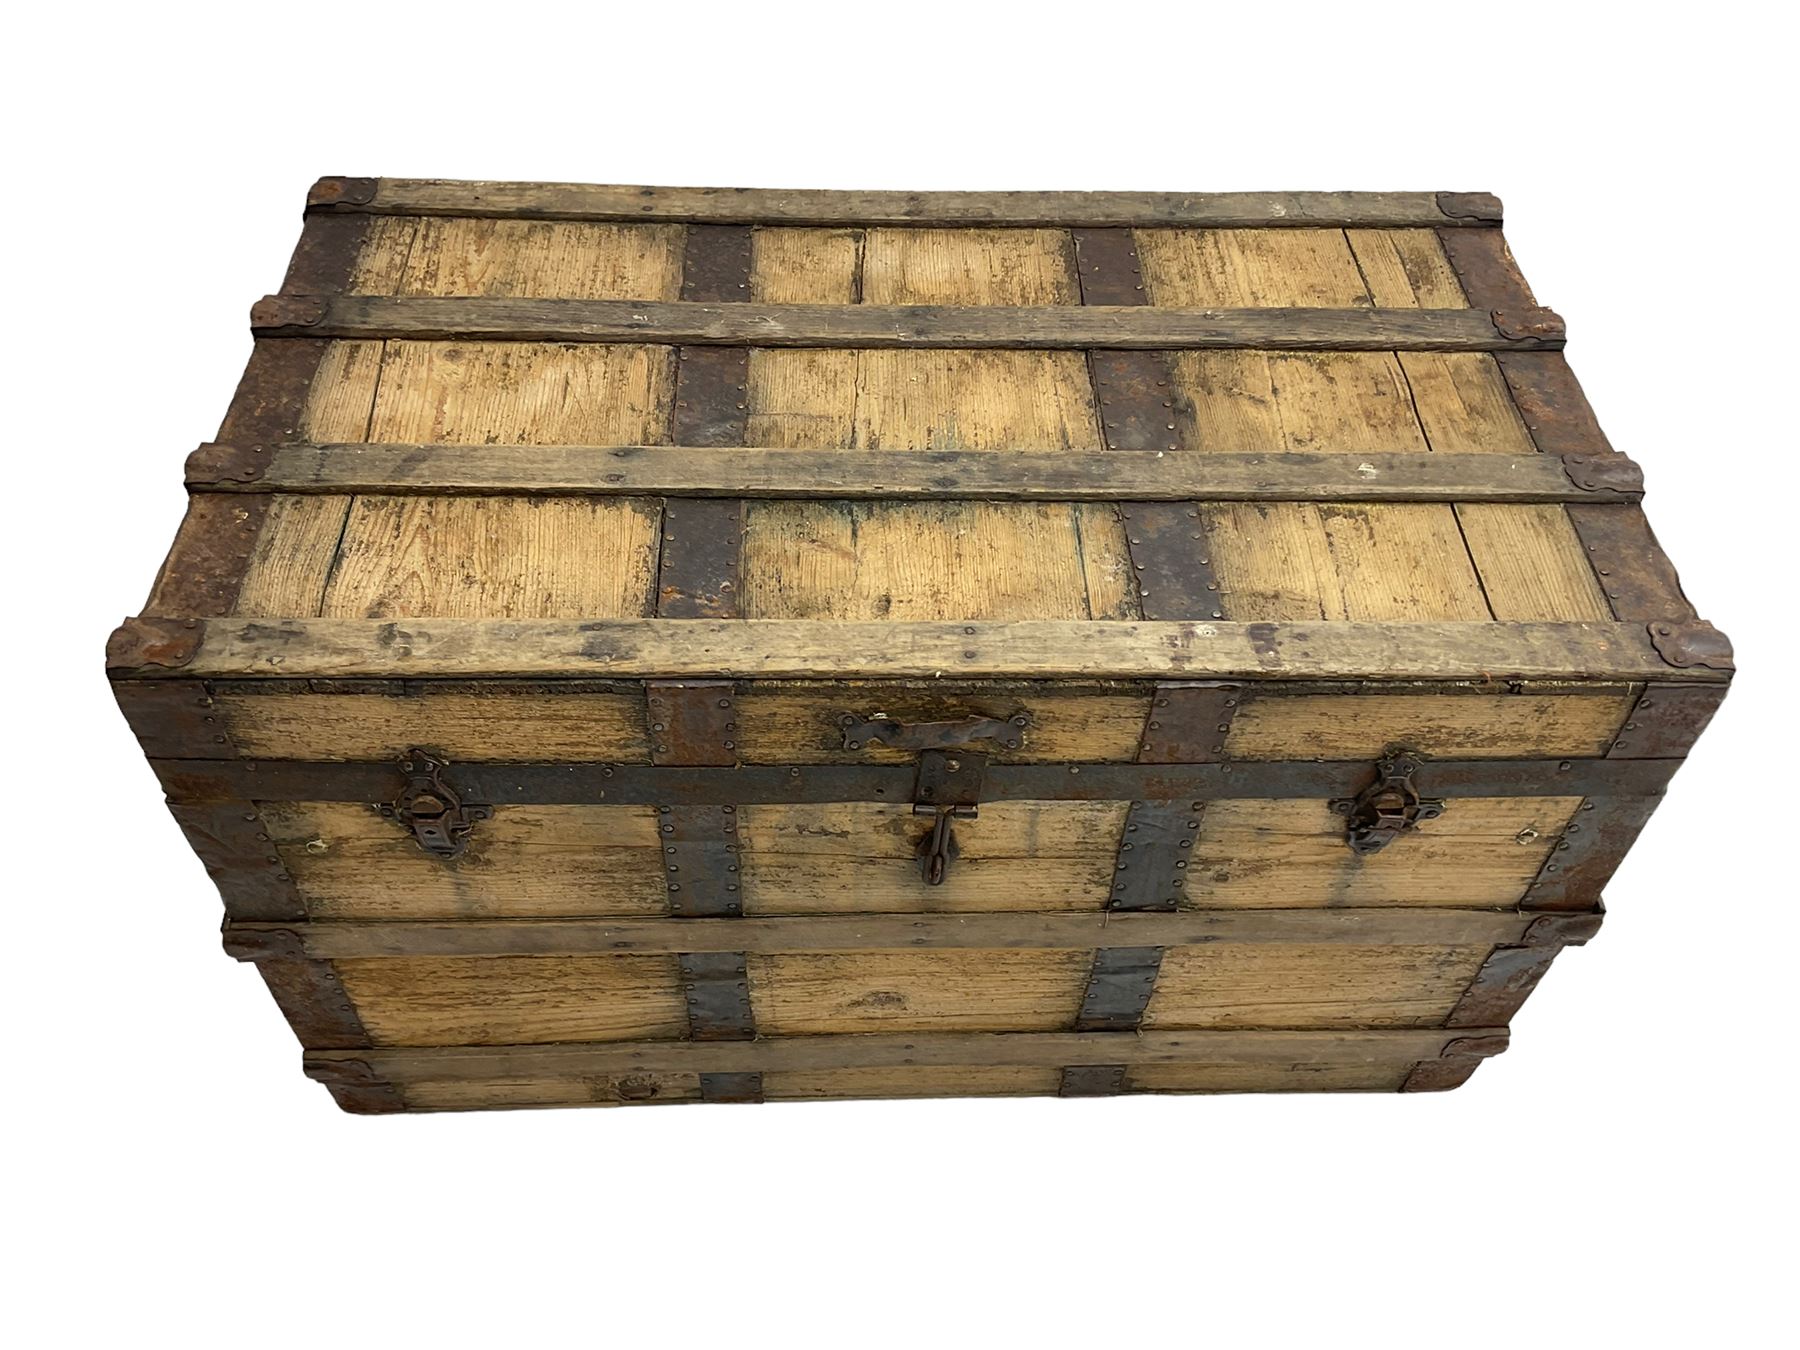 Early 20th century wooden and metal bound trunk - Image 7 of 7